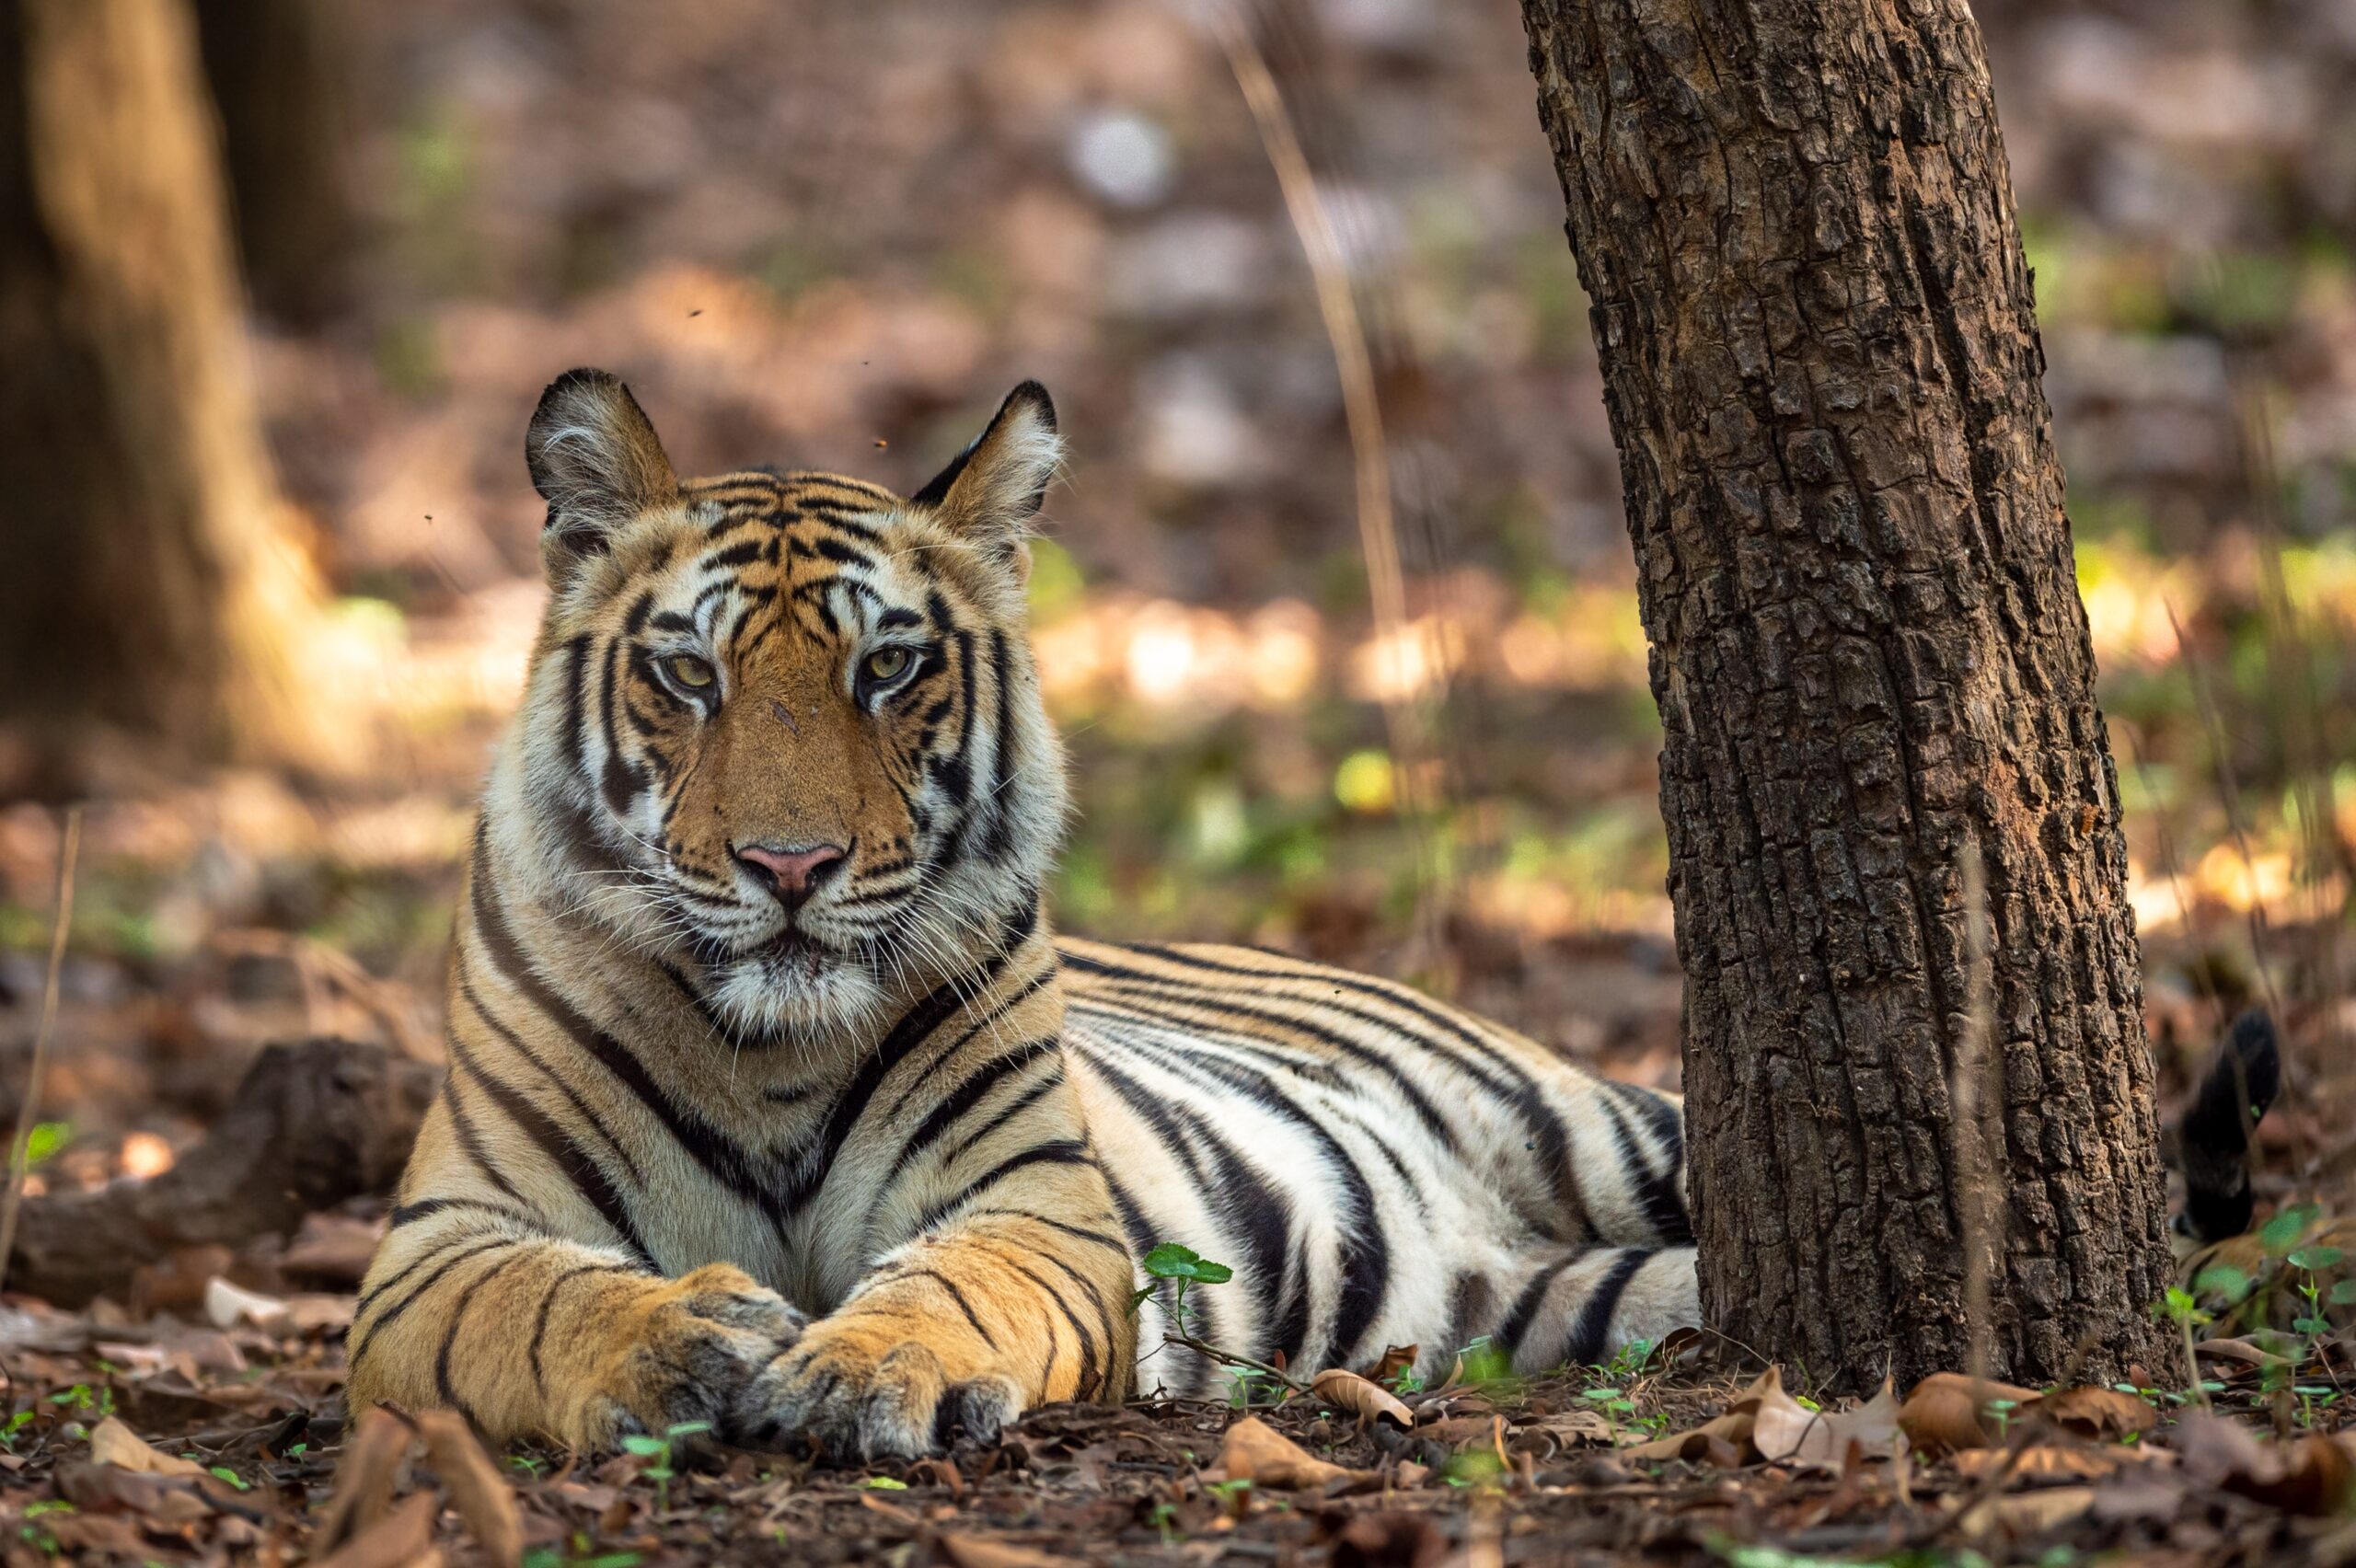 A beautiful tiger basks in sun-dappled shade beside a tree in New Delhi - Tigers and Temples - Women in Wildlife Photography